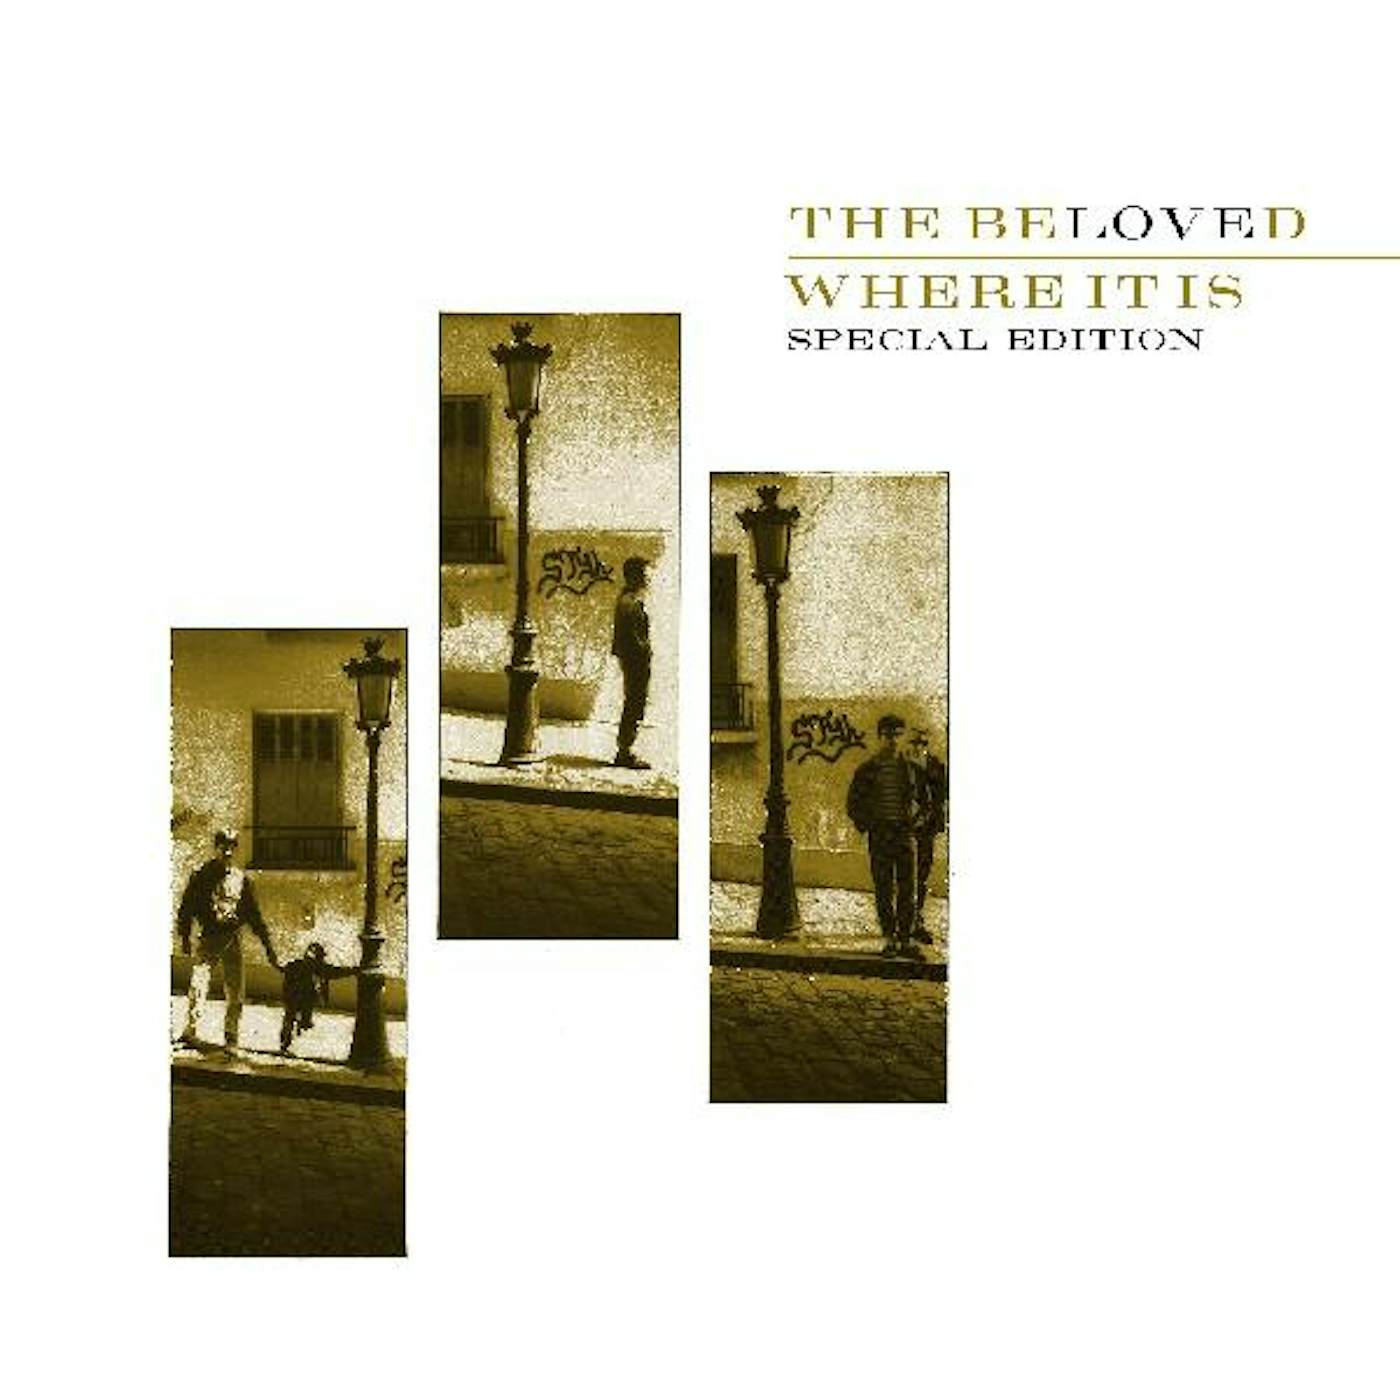 The Beloved WHERE IT IS CD